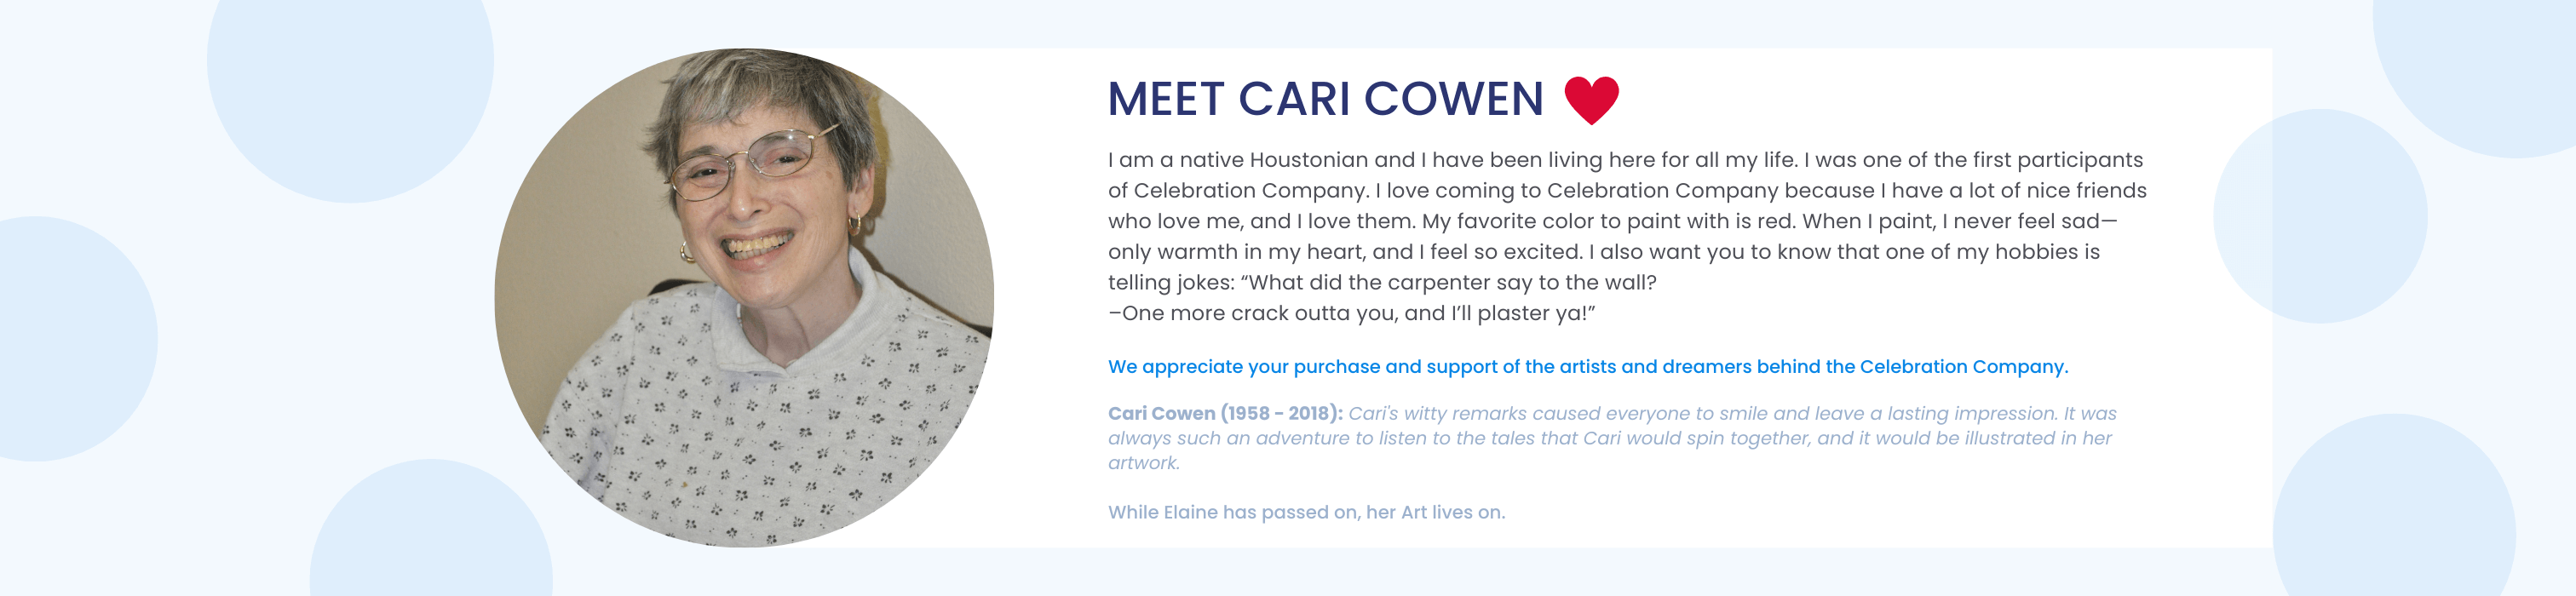 Meet Cari Cowen. I am a native Houstonian and I have been living here for all my life. I was one of the first participants of Celebration Company. I love coming to Celebration Company because I have a lot of nice friends who love me, and I love them. 